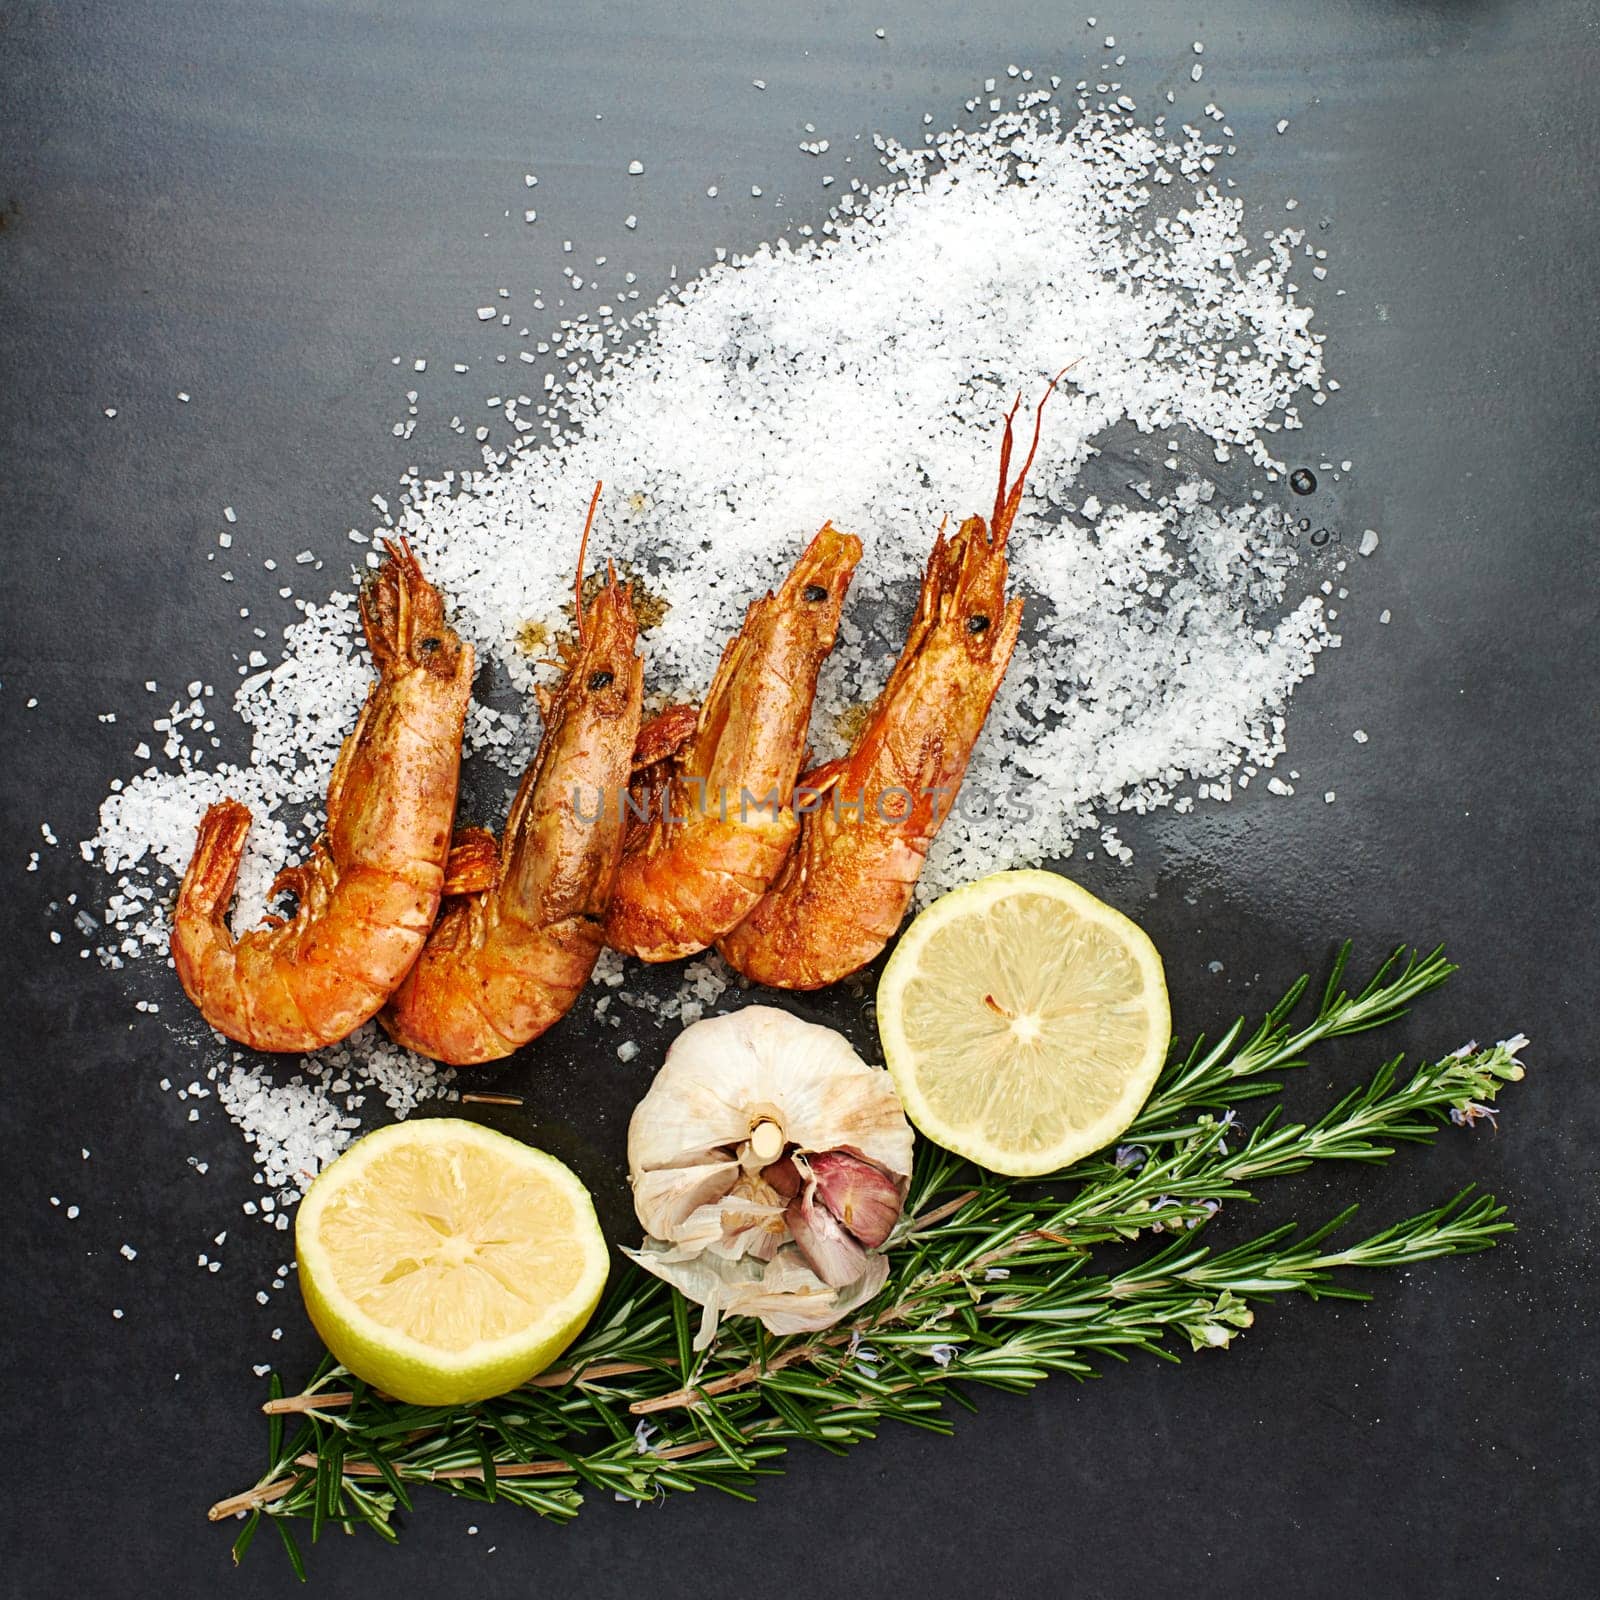 Healthy, food and prawns with herbs on table for natural, organic and nutrition to prepare seafood dish. Pescatarian, fish and protein with minerals to prevent cancer to diet for weight loss.